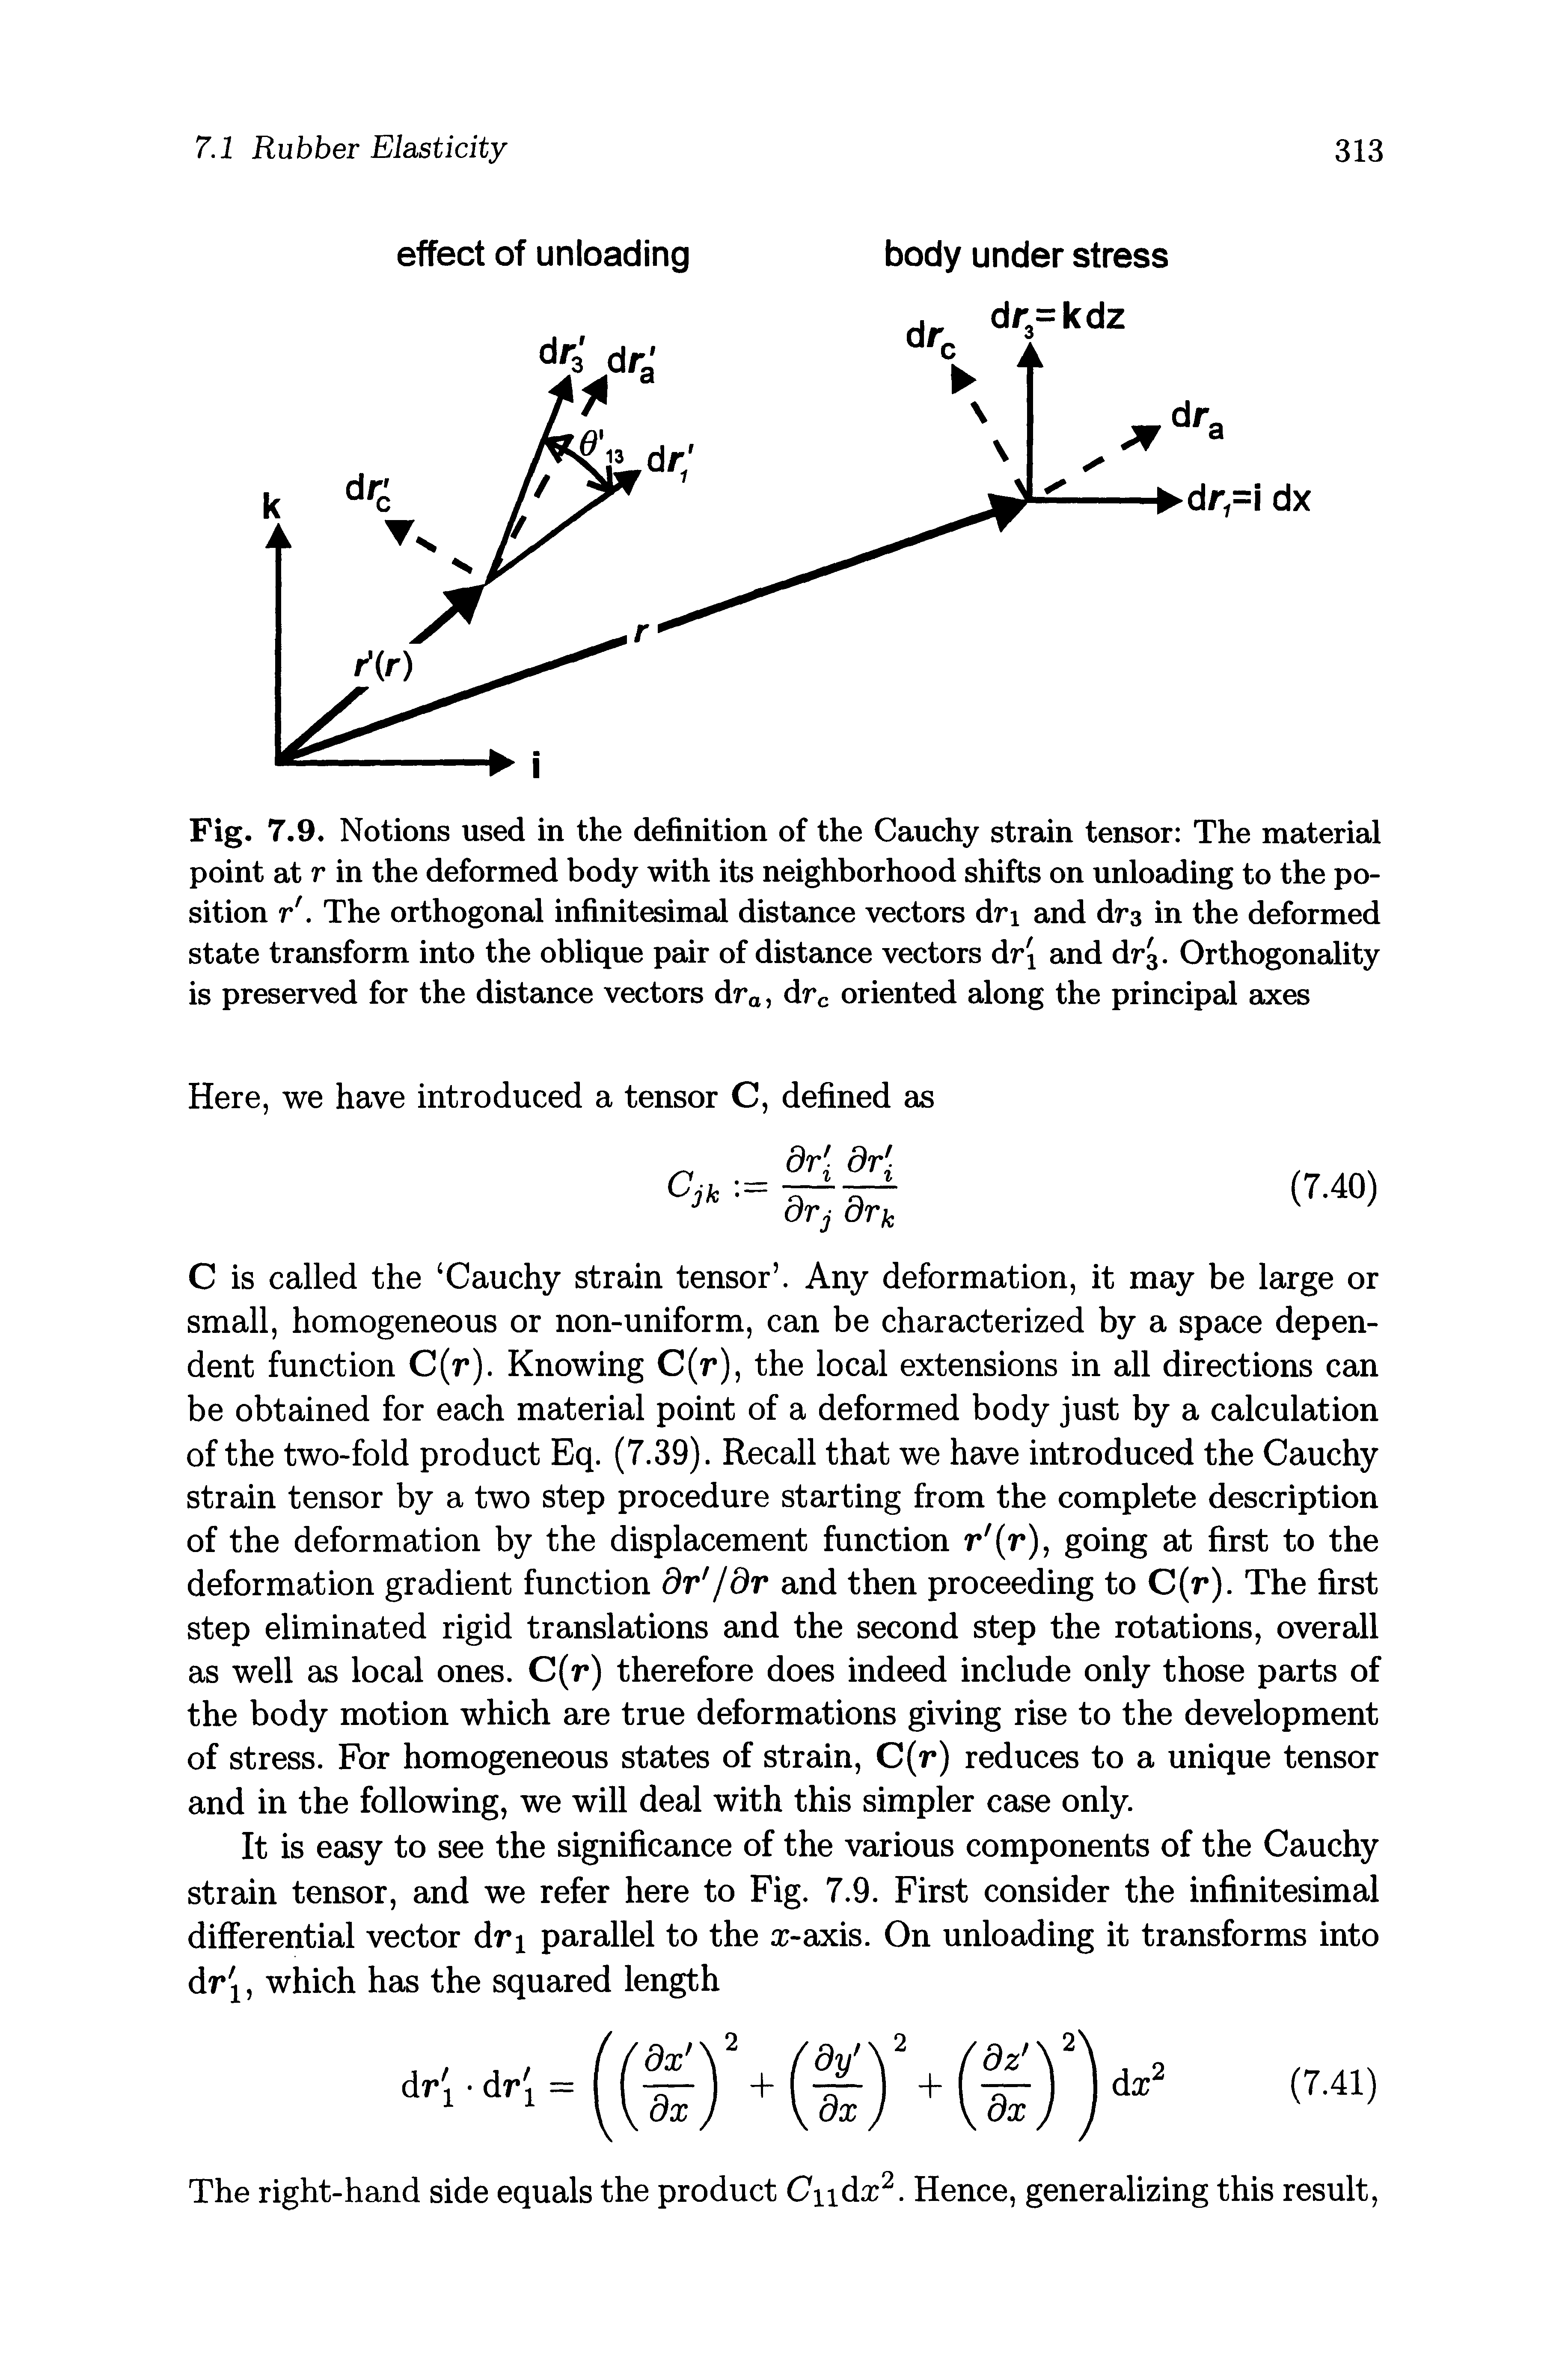 Fig. 7.9. Notions used in the definition of the Cauchy strain tensor The material point at r in the deformed body with its neighborhood shifts on unloading to the position r. The orthogonal infinitesimal distance vectors dri and drs in the deformed state transform into the oblique pair of distance vectors dri and dr. Orthogonality is preserved for the distance vectors dra, drc oriented along the principal axes...